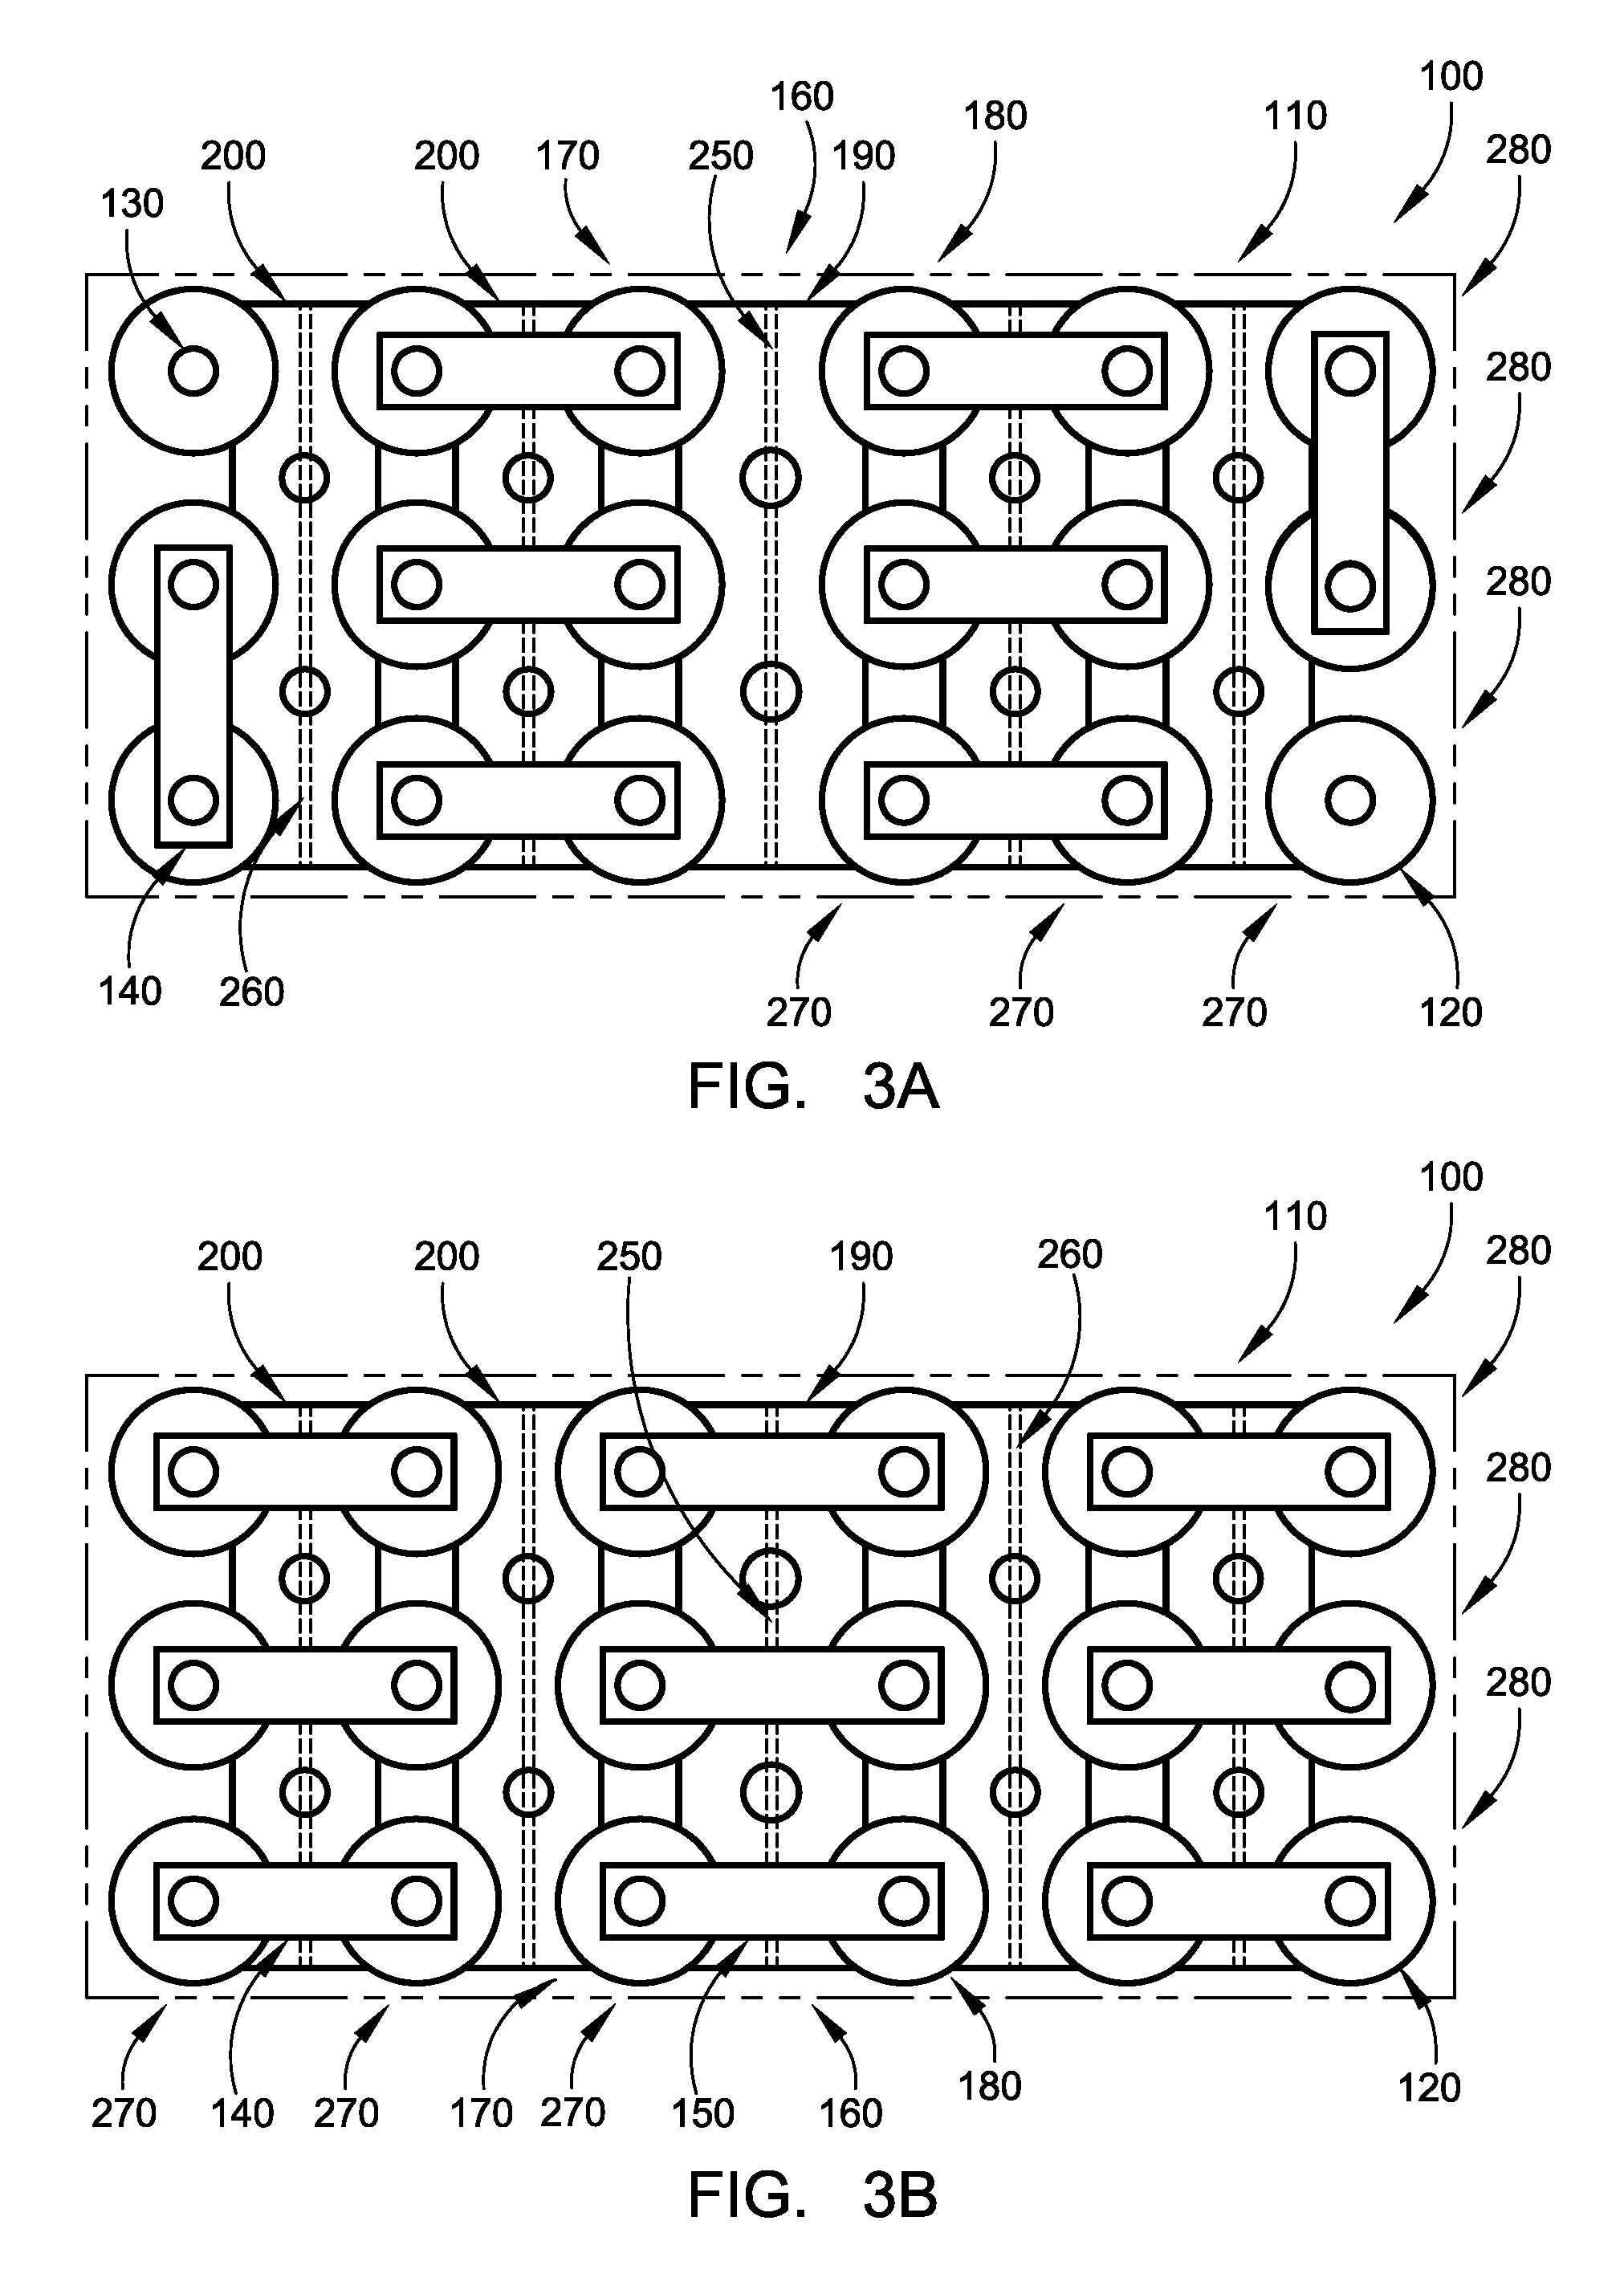 Energy Storage Cell Support Separator and Cooling System for a Multiple Cell Module